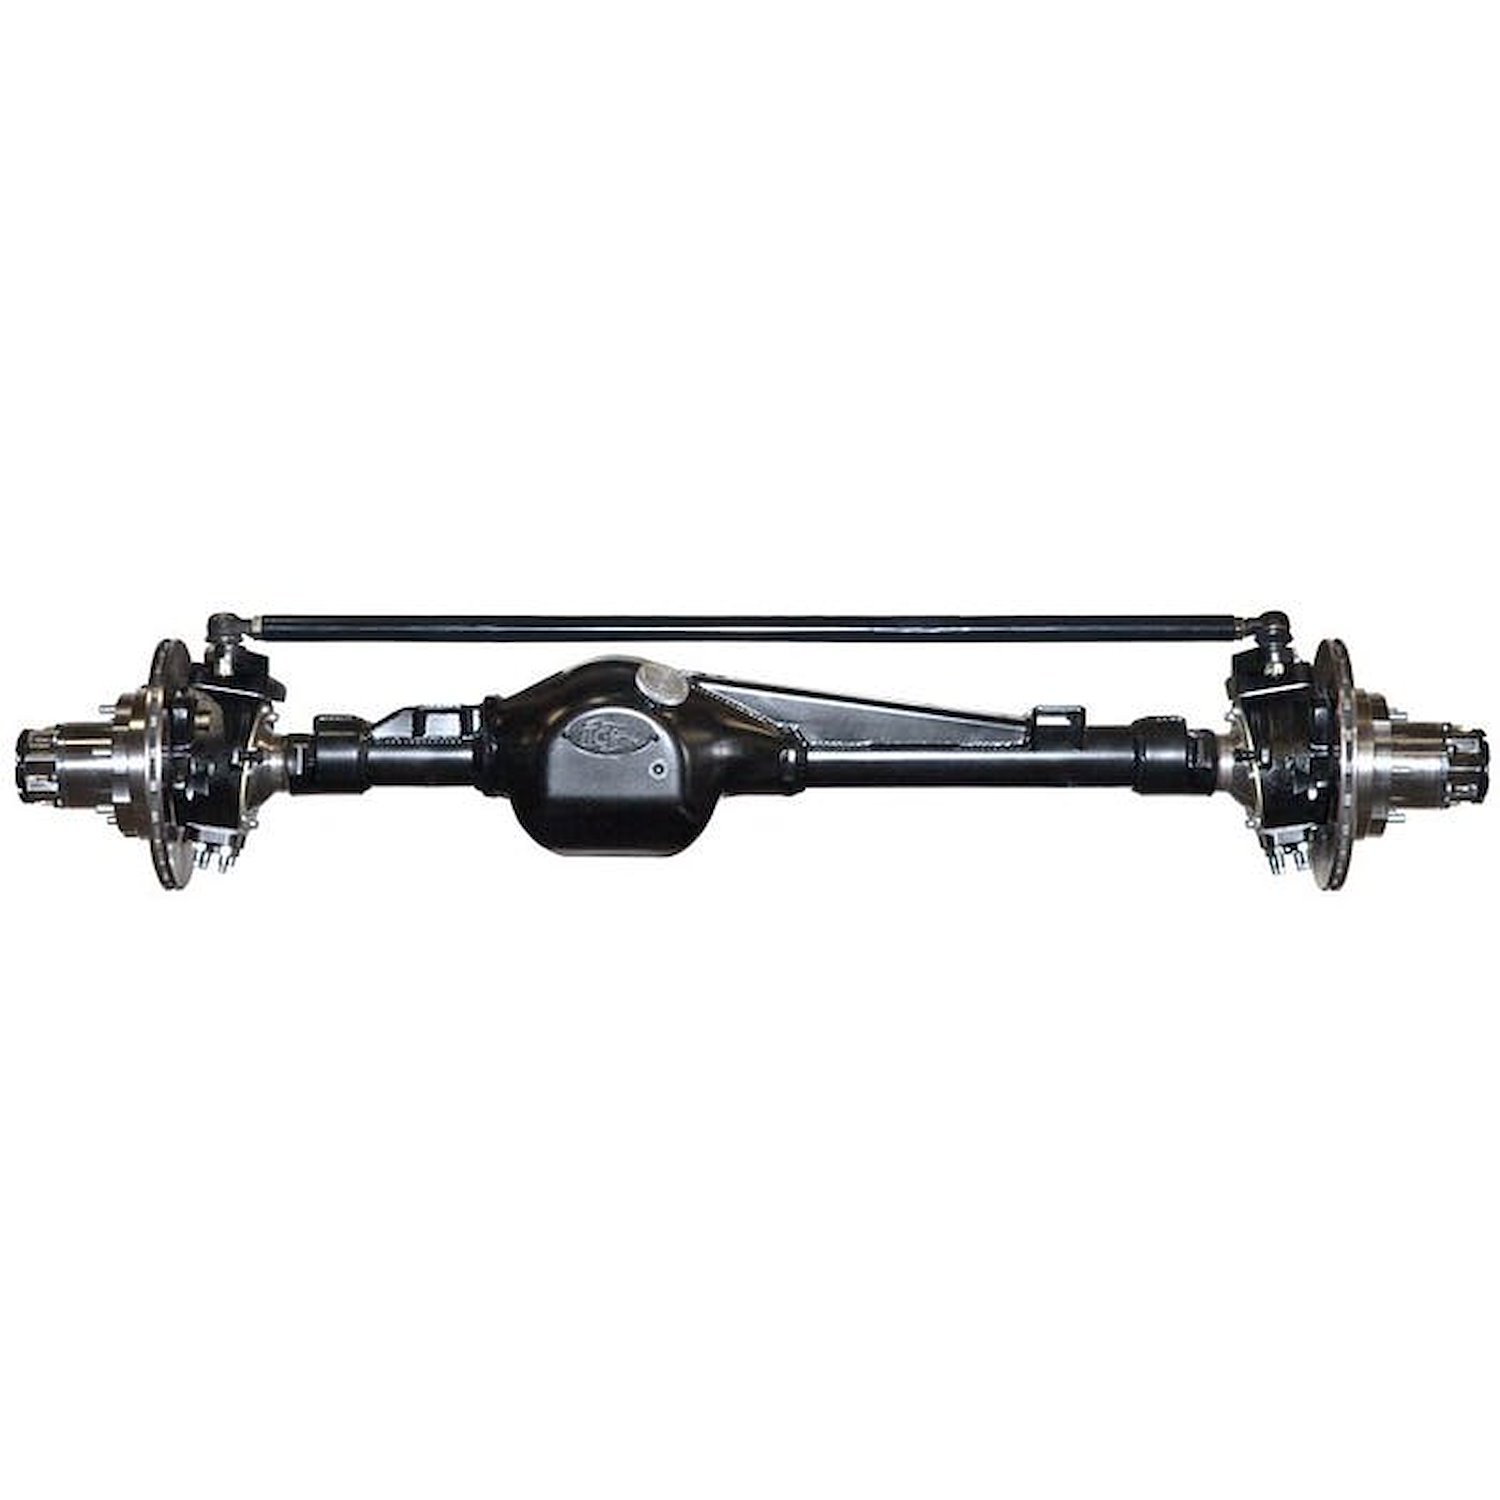 301609-1-KIT Rock Assault Fully-Built Front Axles, +3 Width, RHD, High-Pinion, 4.88, Grizzly, Locking Hubs, Toyota